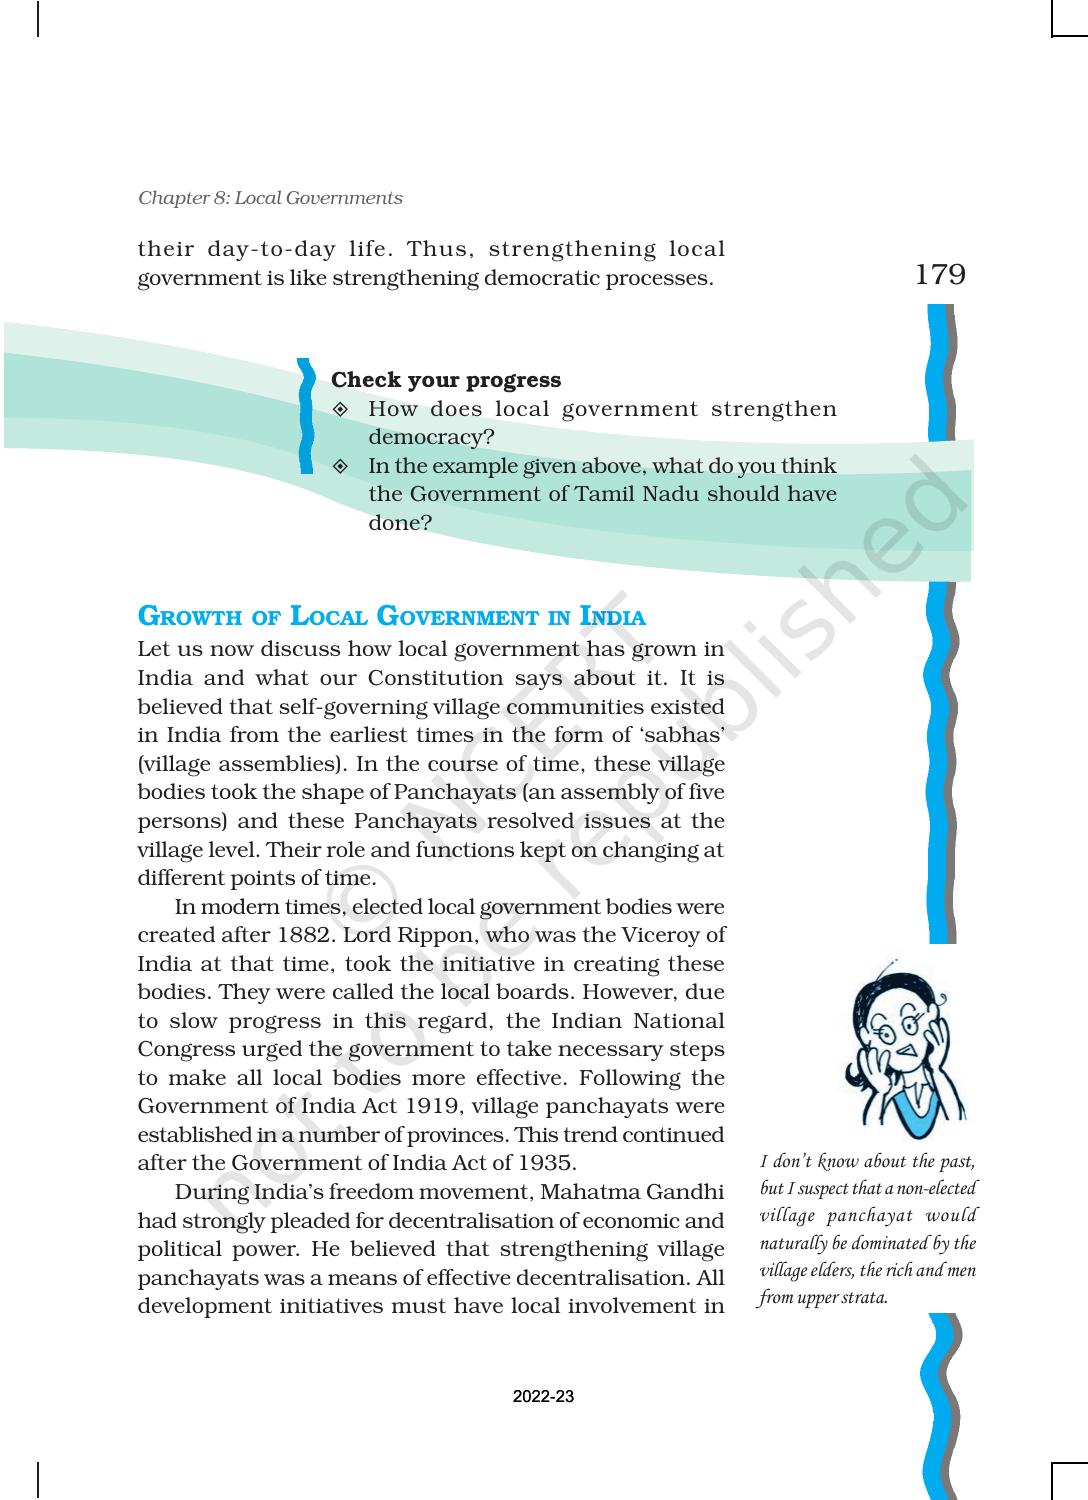 NCERT Book for Class 11 Political Science (Indian Constitution at Work) Chapter 8 Local Governments - Page 4